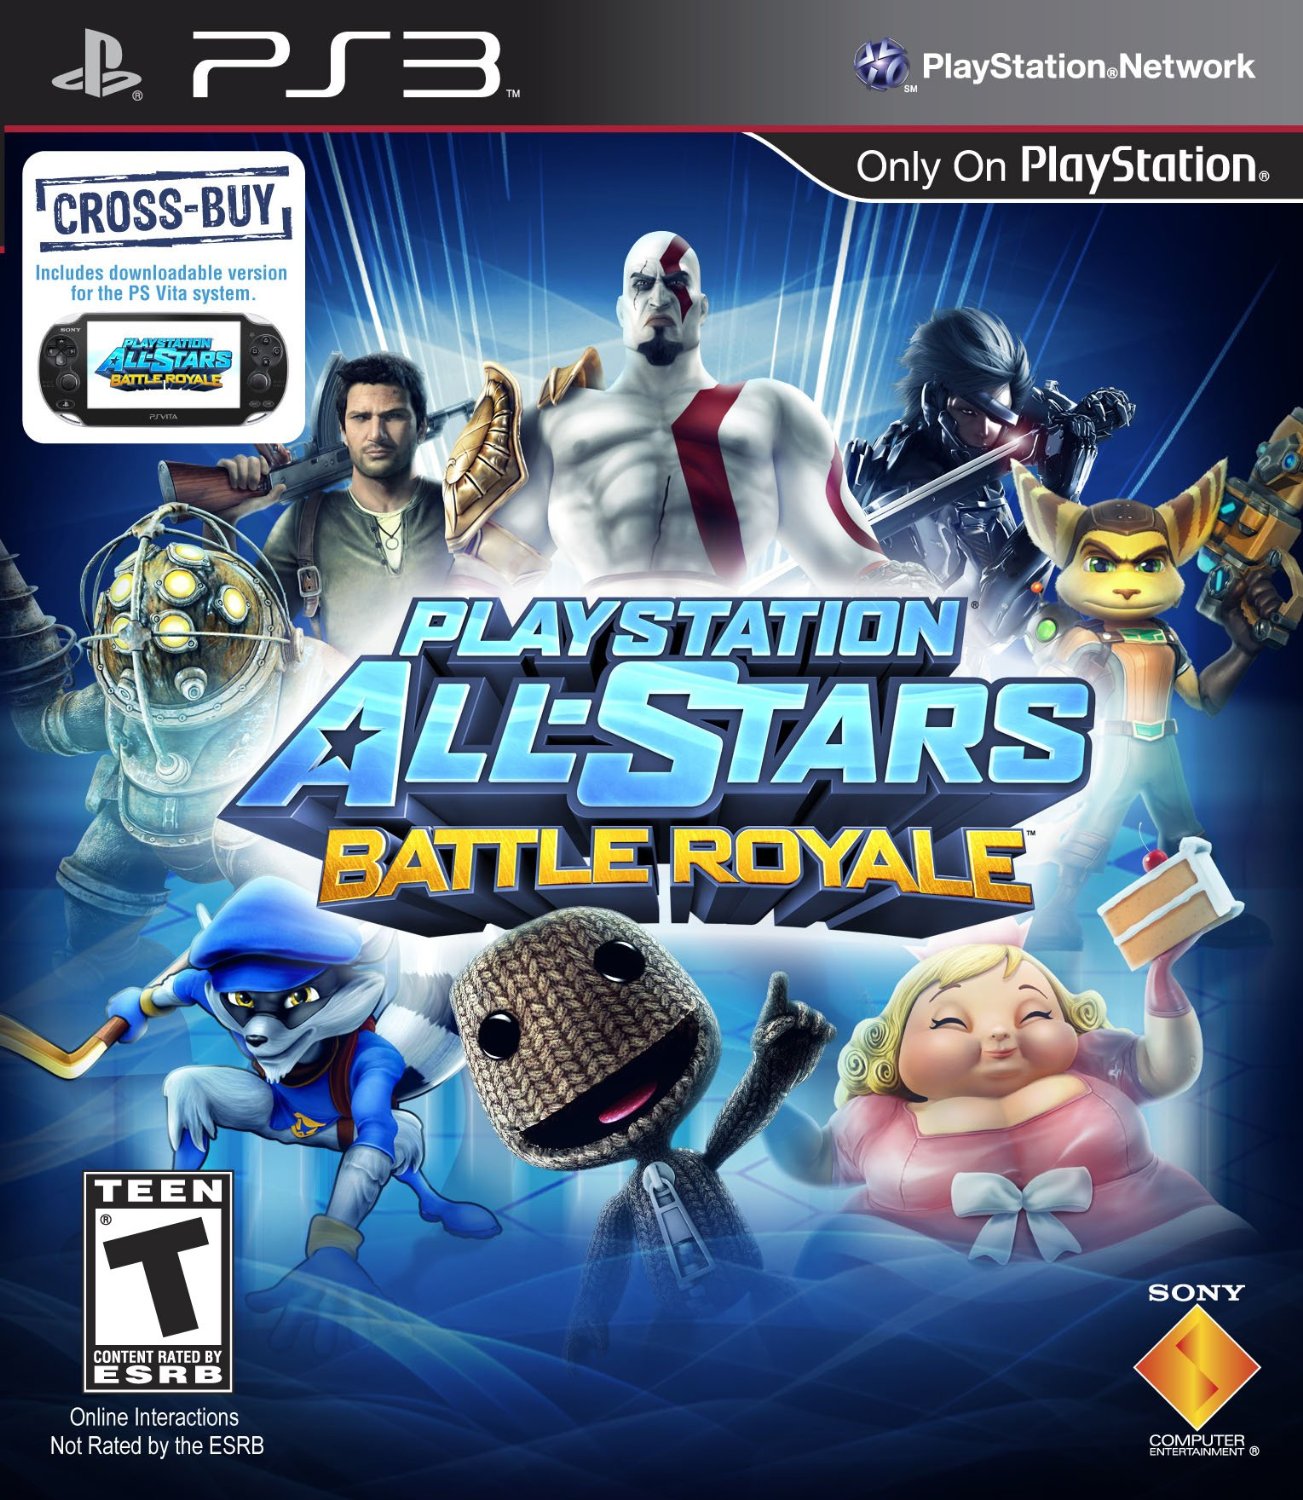 All-Stars Battle Star Royale for PlayStation 3 Only $19.39 – 68% Savings